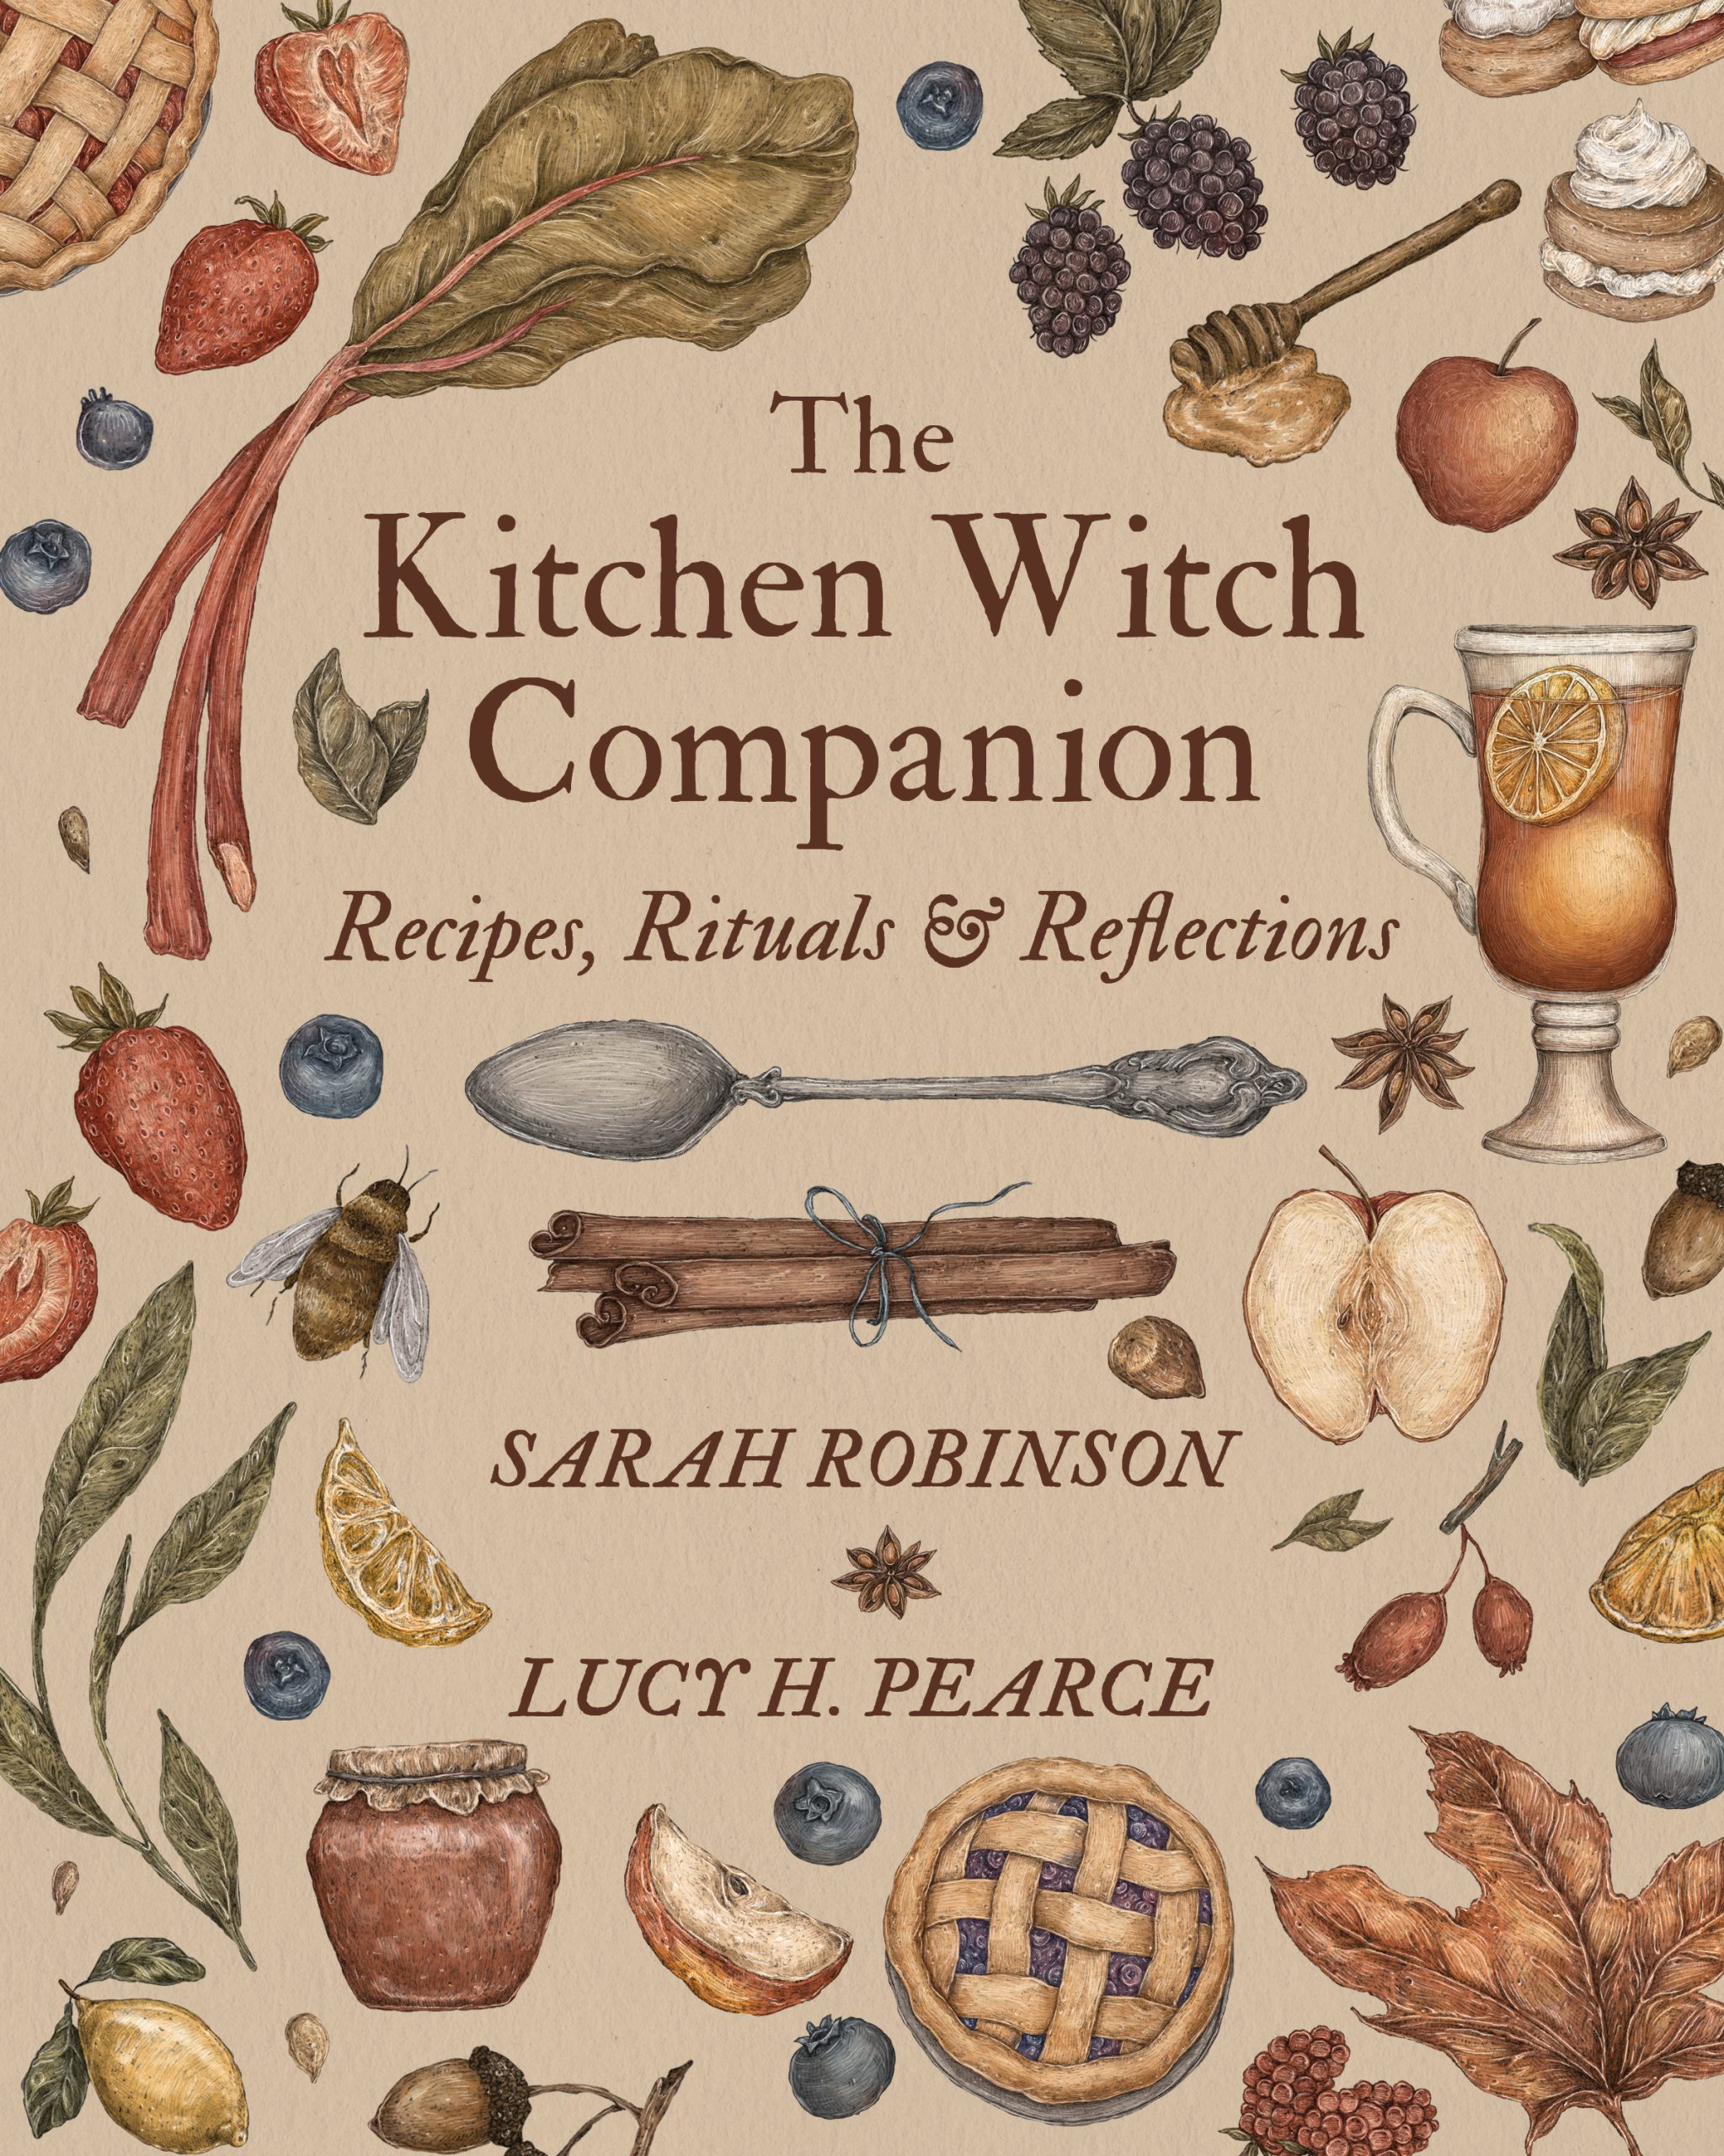 The Kitchen Witch Companion by Sarah Robinson & Lucy H. Pearce, Womancraft Publishing